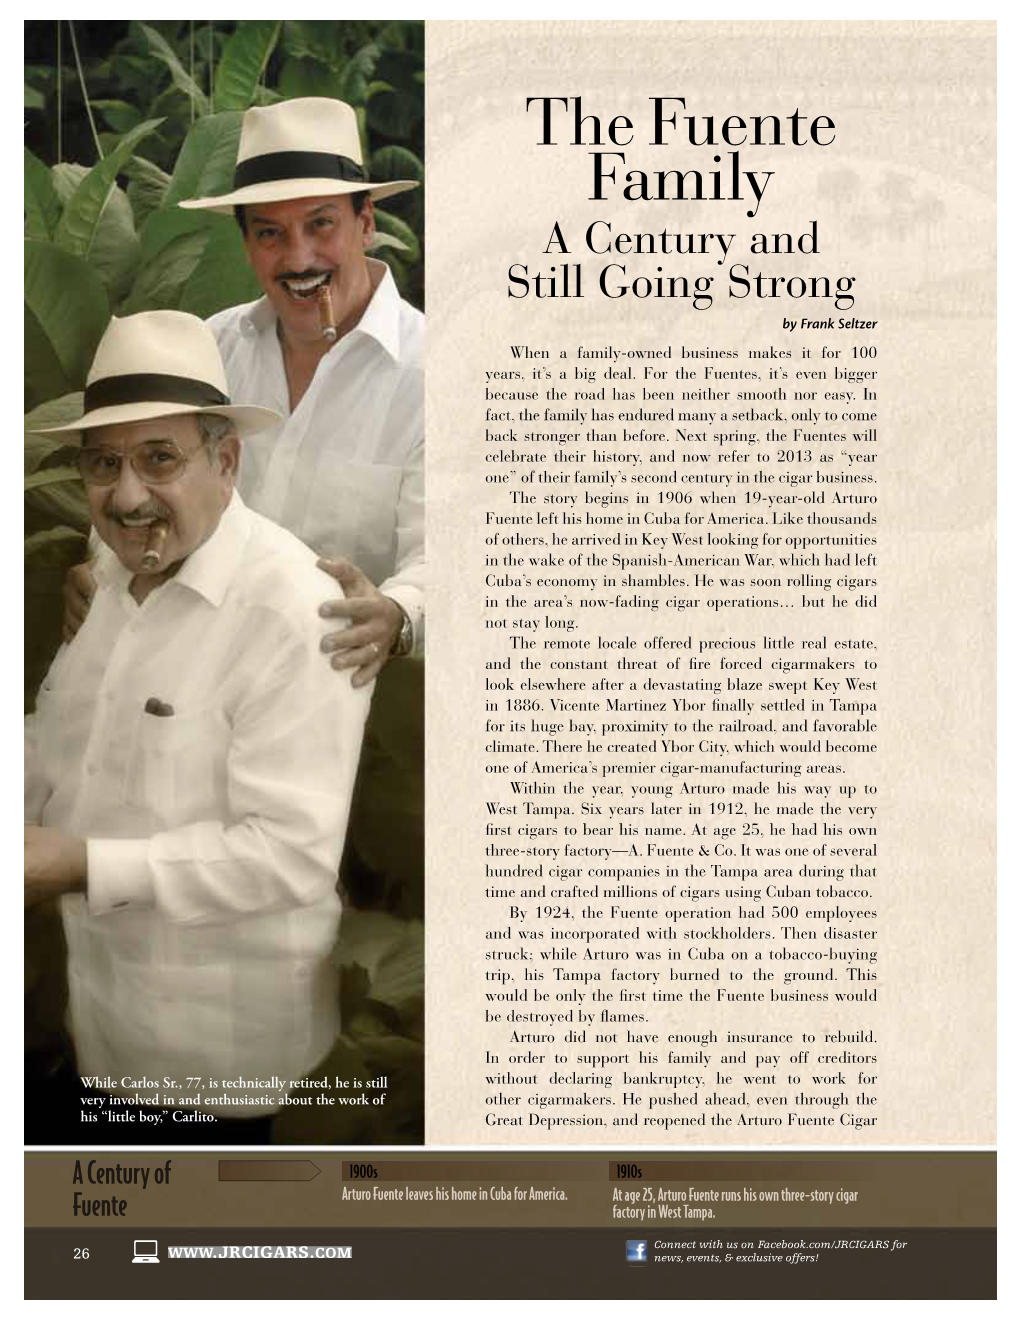 The Fuente Family a Century and Still Going Strong by Frank Seltzer When a Family-Owned Business Makes It for 100 Years, It’S a Big Deal